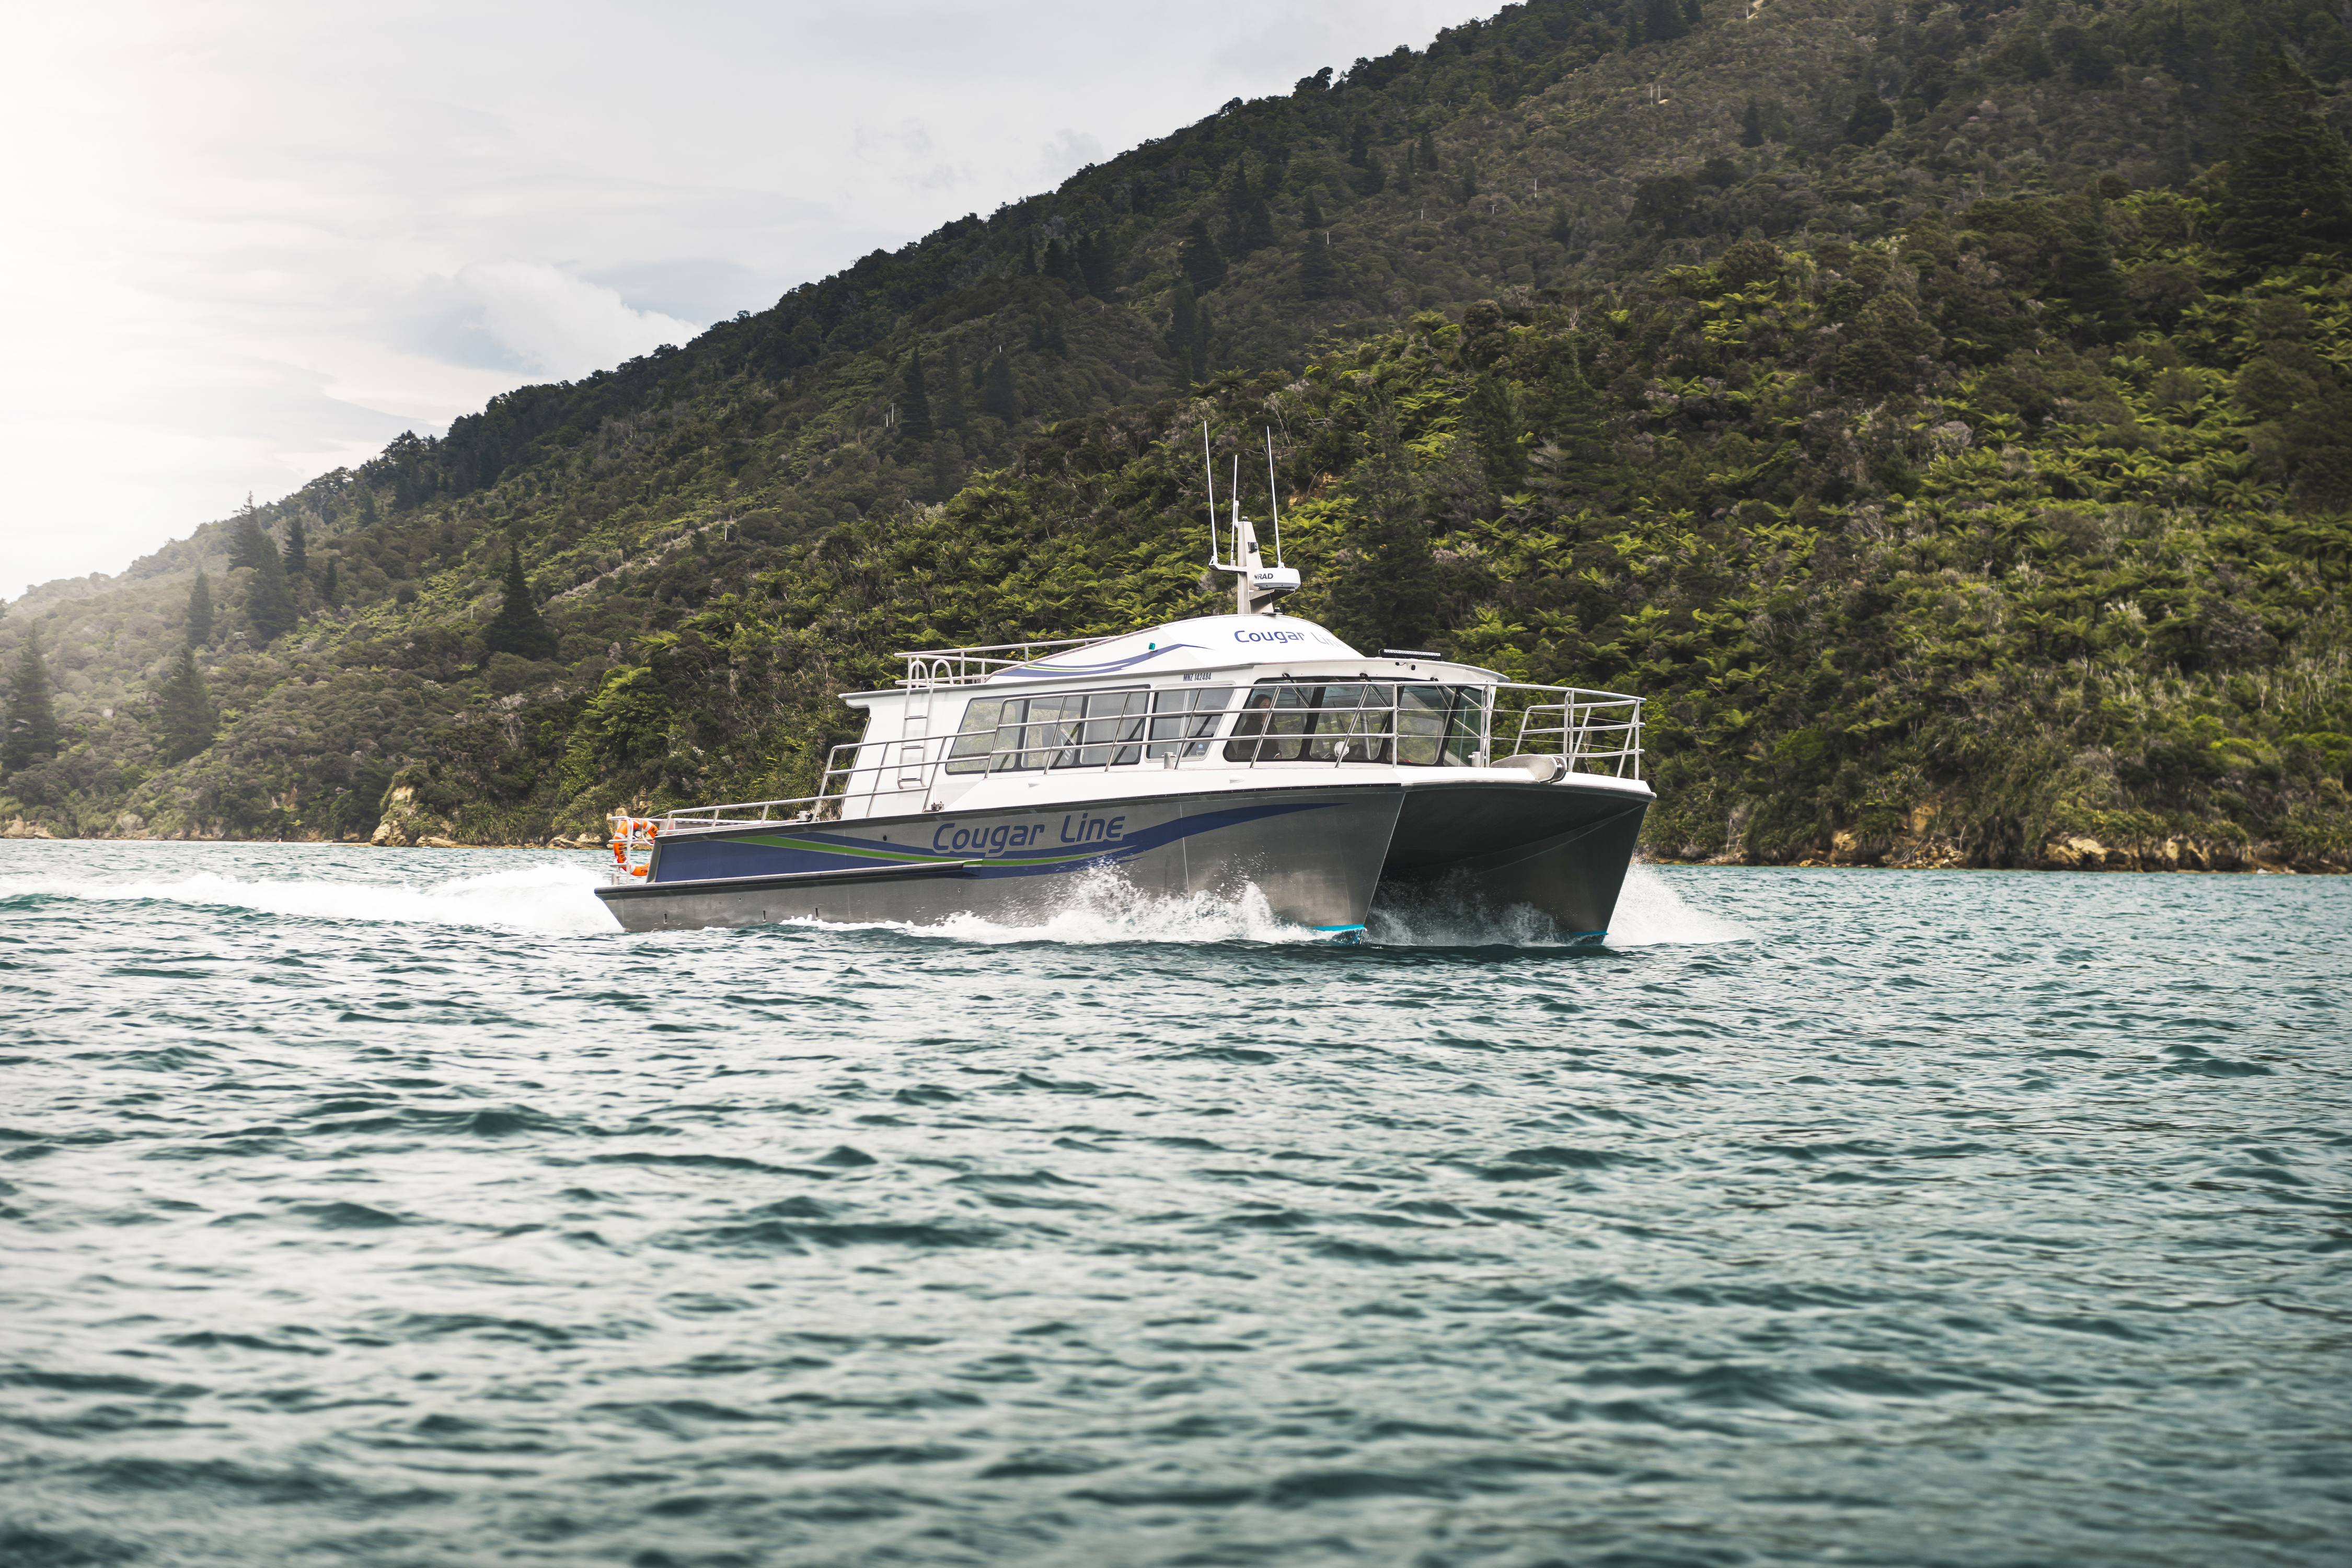 The name on the side of Cougar Line's Sounds Exciting boat sits above the boat's wake, while cruising the Marlborough Sounds, New Zealand